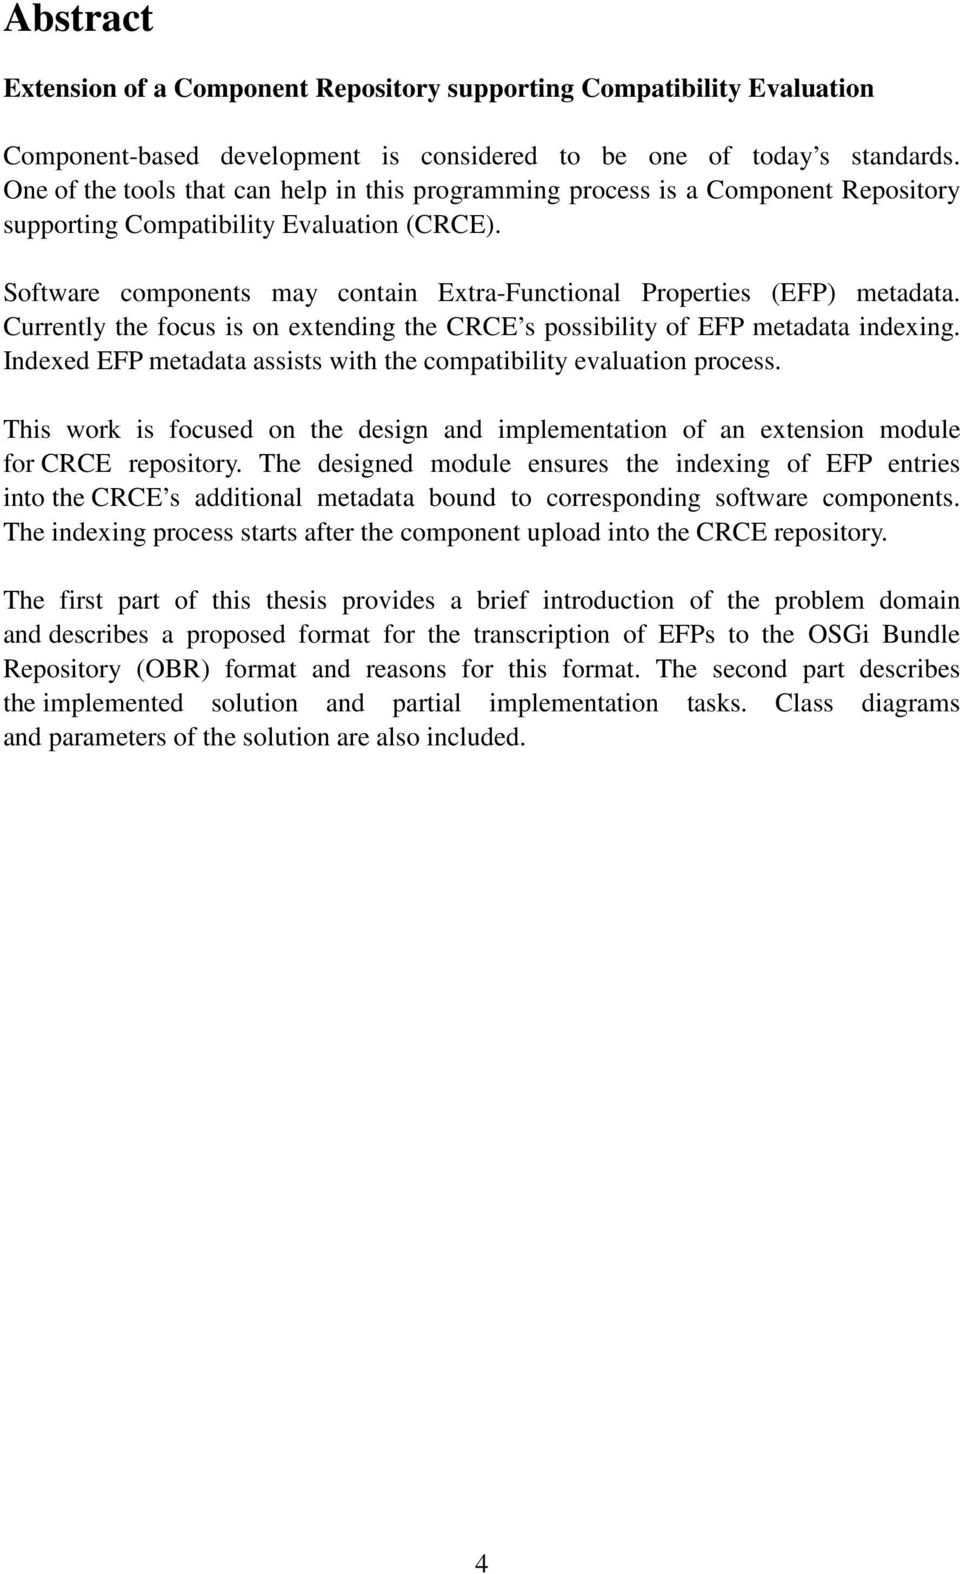 Software components may contain Extra-Functional Properties (EFP) metadata. Currently the focus is on extending the CRCE s possibility of EFP metadata indexing.